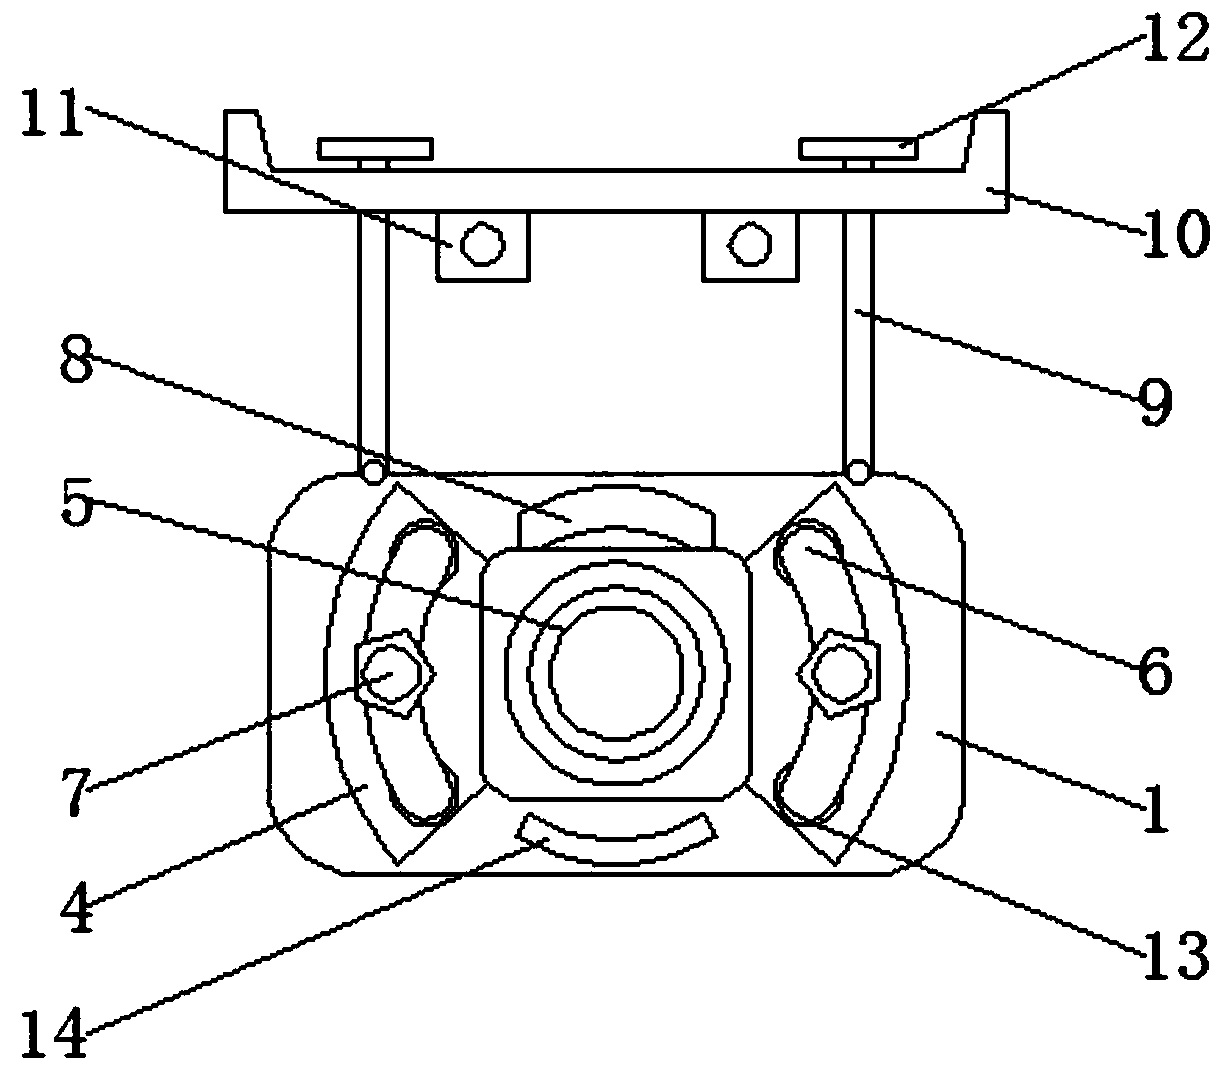 an image capture device